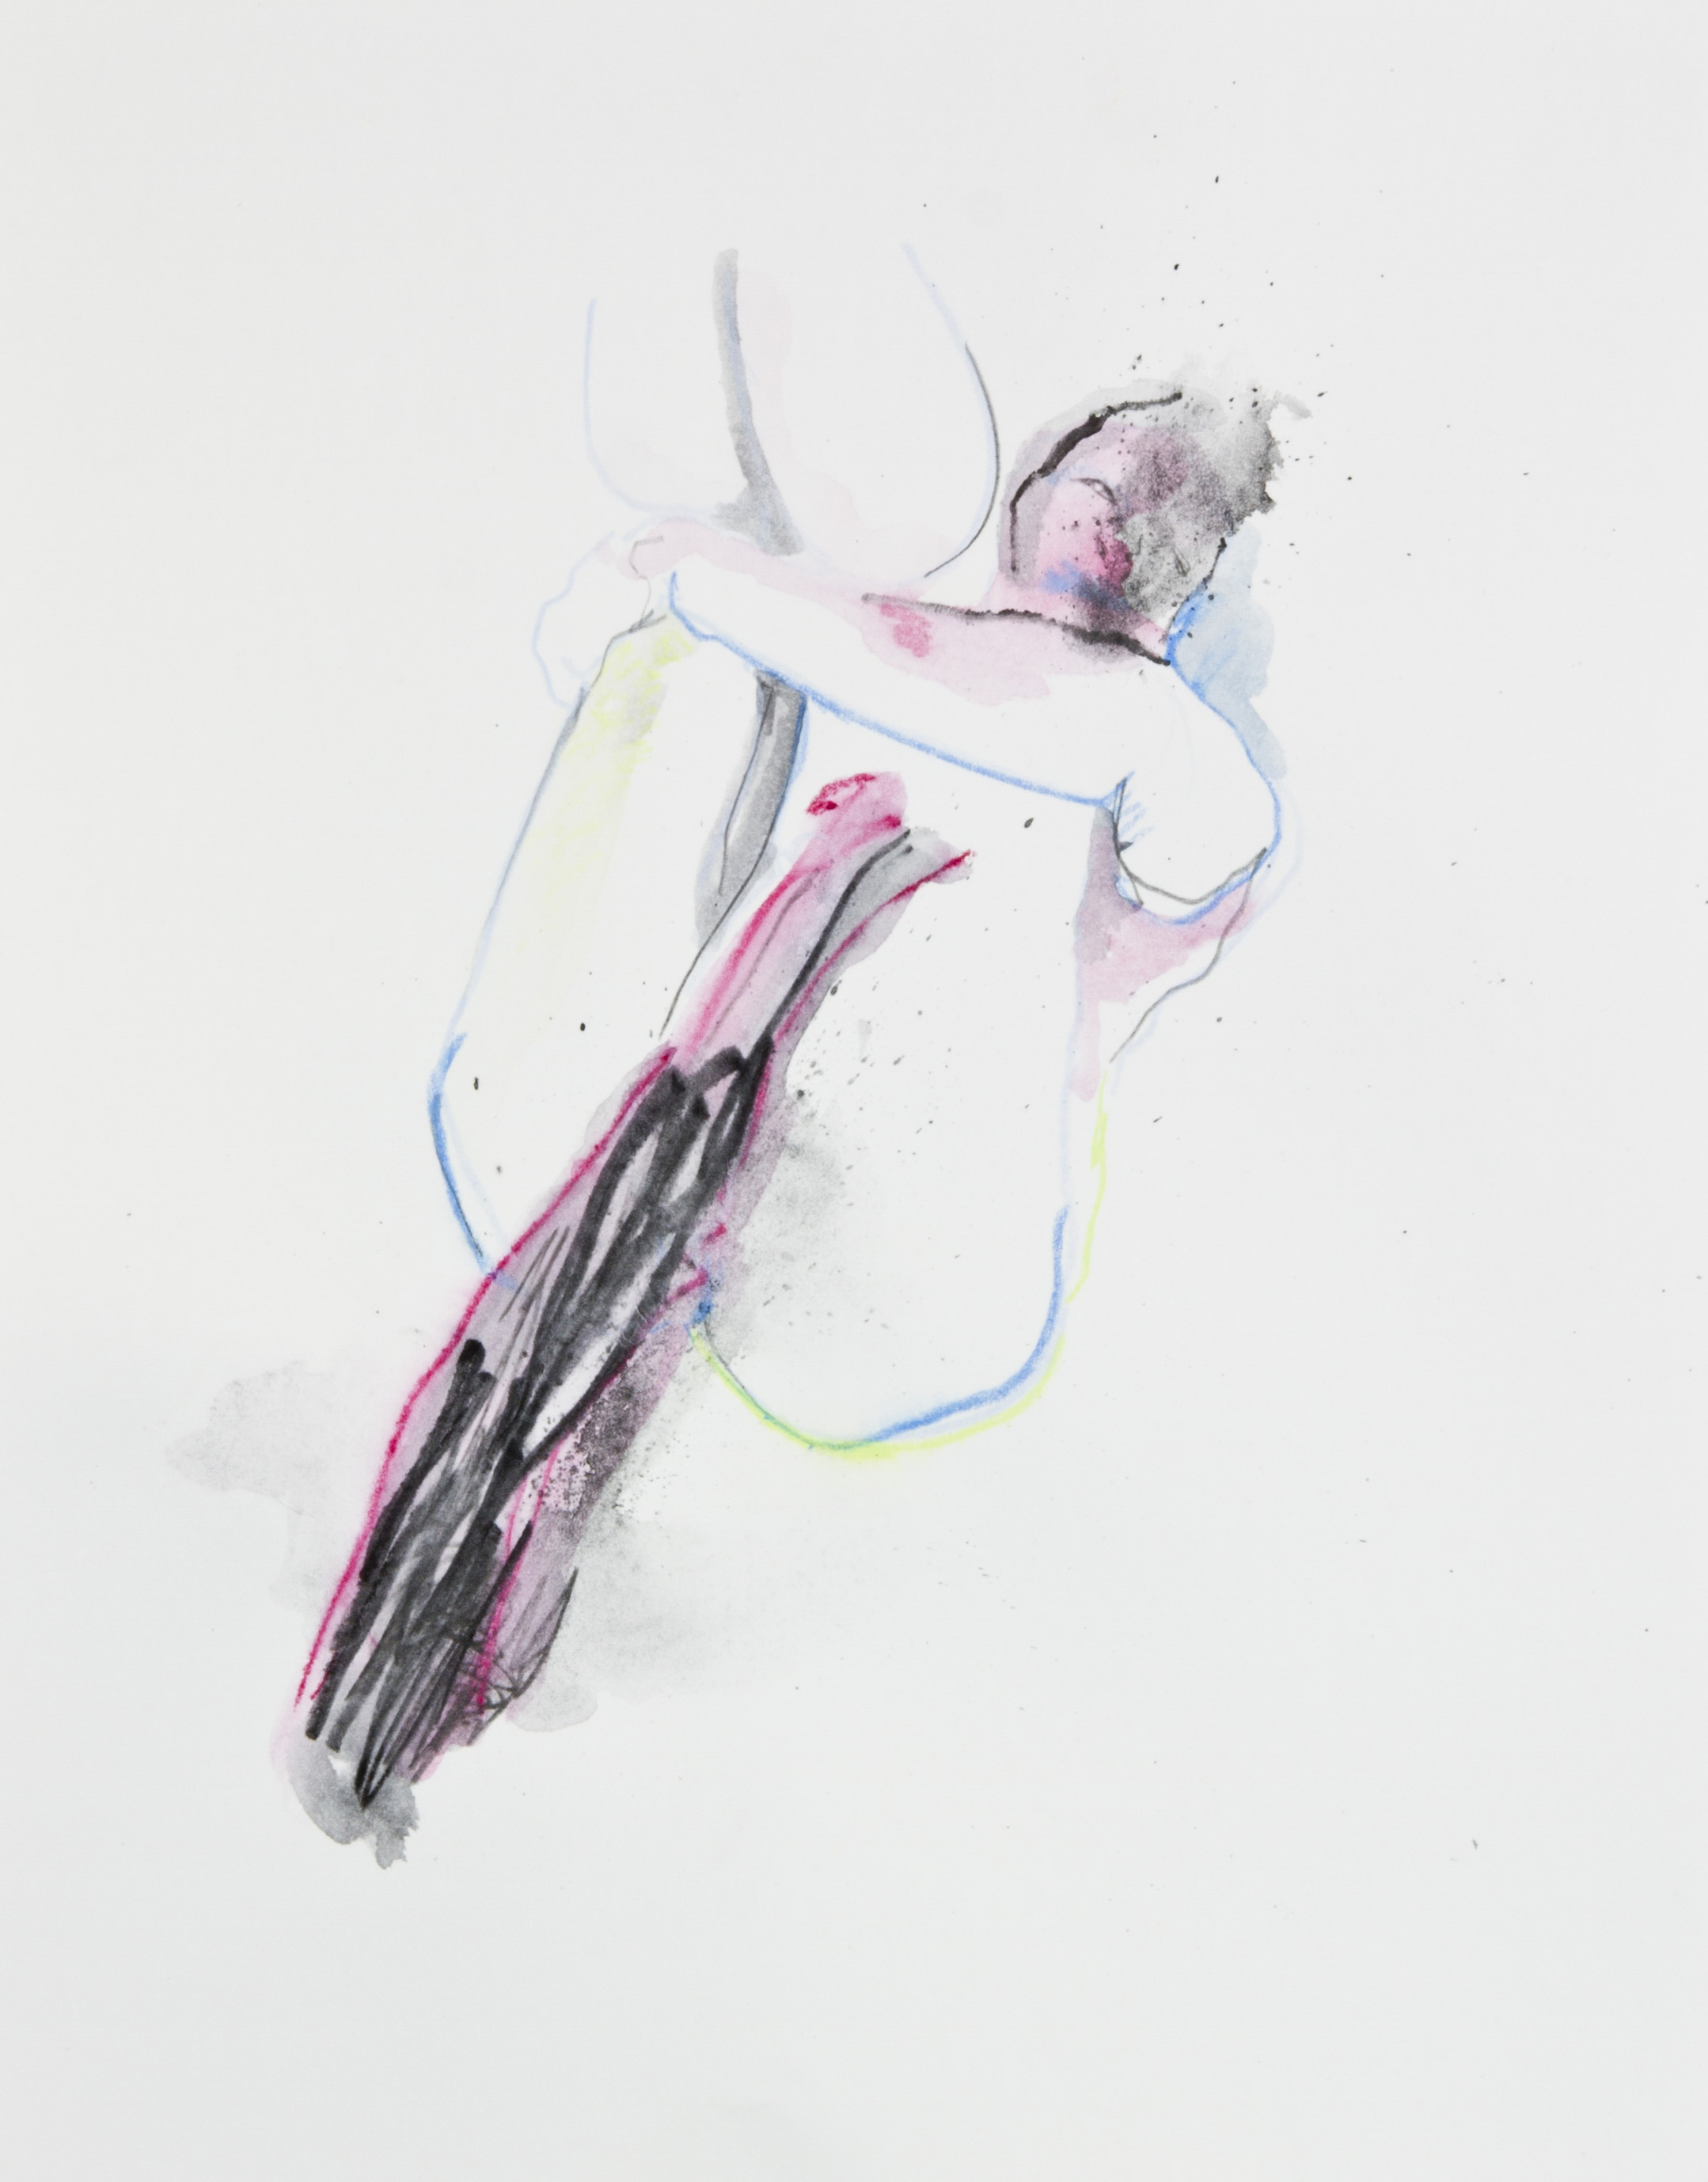 Void Drawers, 2013, graphite, crayon and watercolor pencil on paper, 11x14 inches